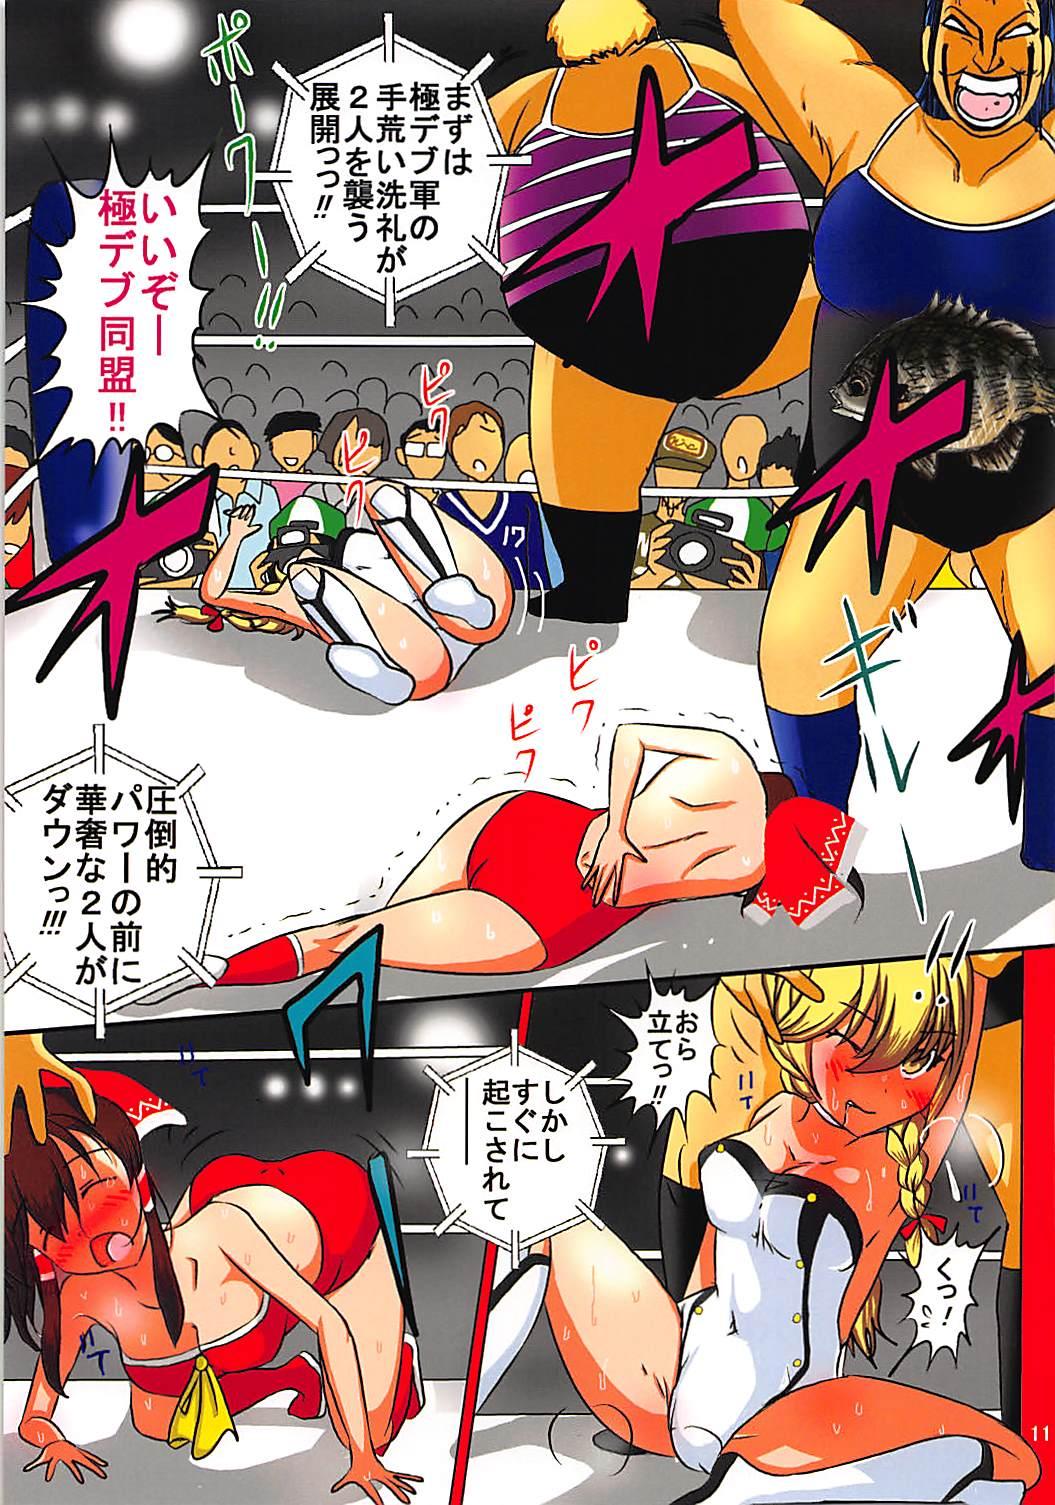 Spain Touhou Ero ProWres Match - Touhou project Swinger - Page 11